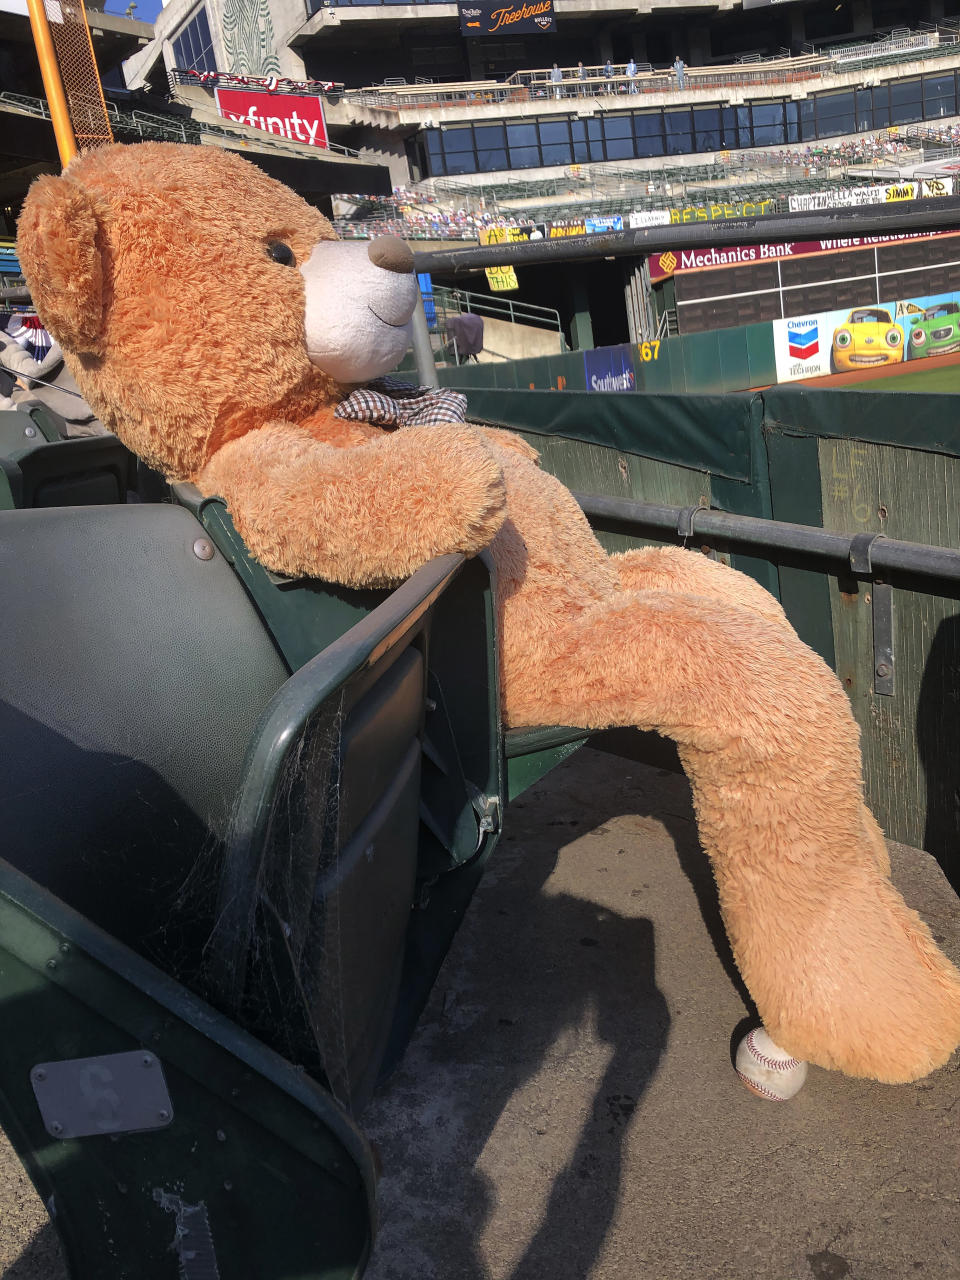 A baseball sits below a stuffed bear seated at Oakland Coliseum after Game 1 of an American League wild-card baseball series between the Oakland Athletics and the Chicago White Sox, Tuesday, Sept. 29, 2020, in Oakland, Calif. (AP Photo/Janie McCauley)